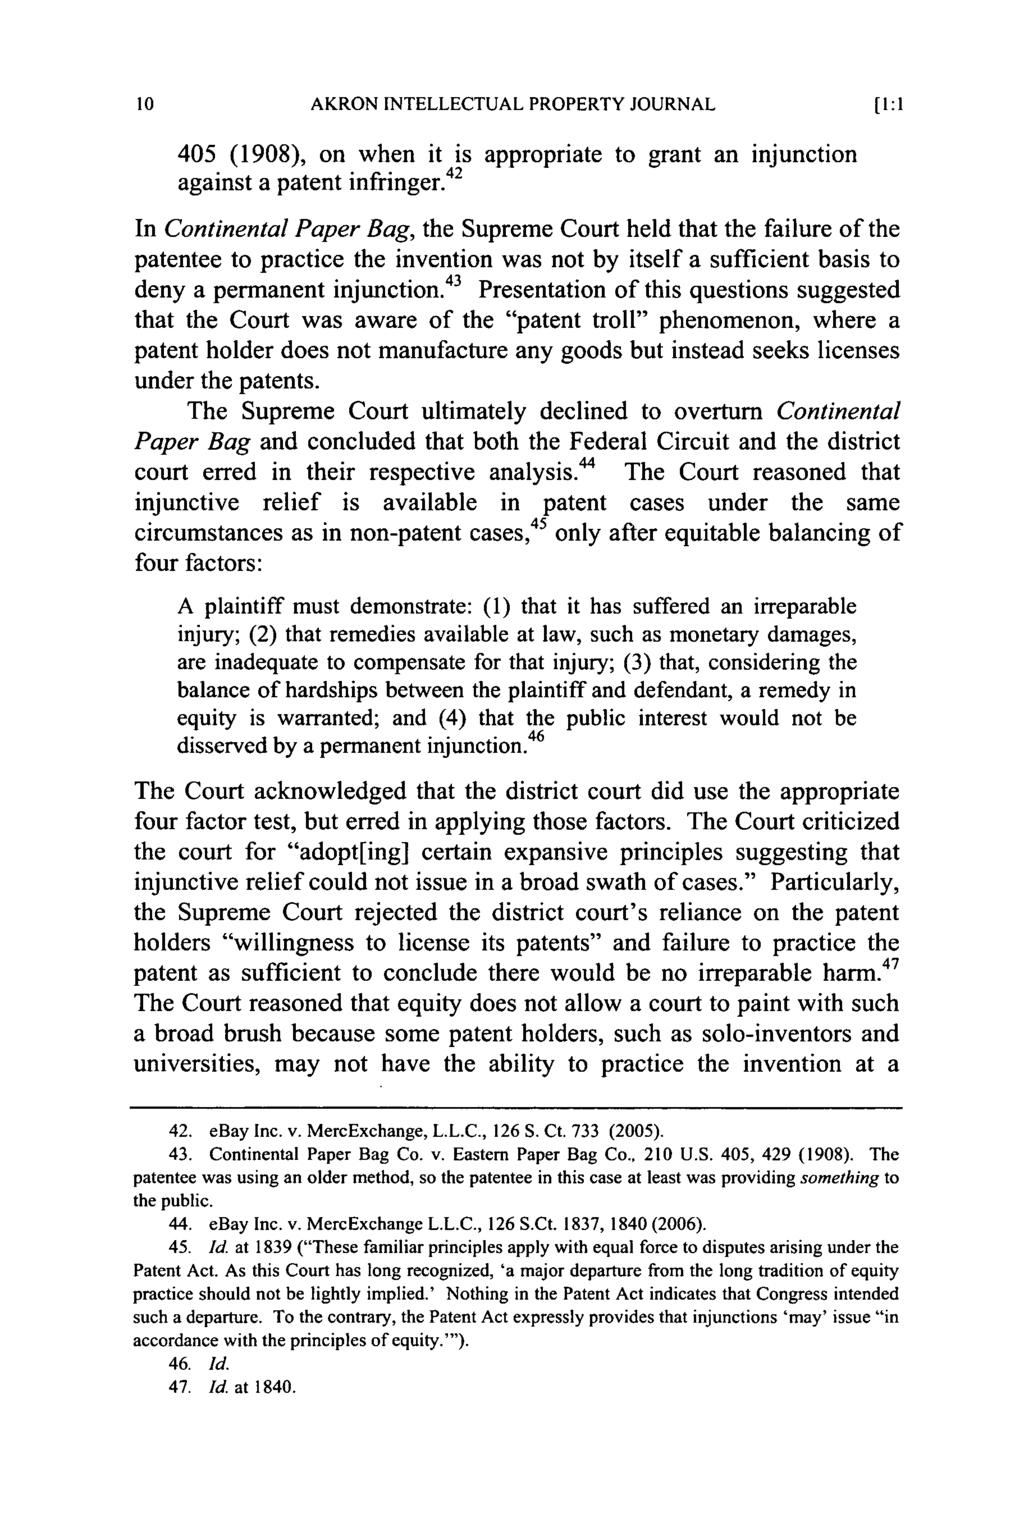 Akron Intellectual Property Journal, Vol. 1 [2007], Iss. 1, Art. 1 AKRON INTELLECTUAL PROPERTY JOURNAL 405 (1908), on when it is appropriate to grant an injunction against a patent infringer.